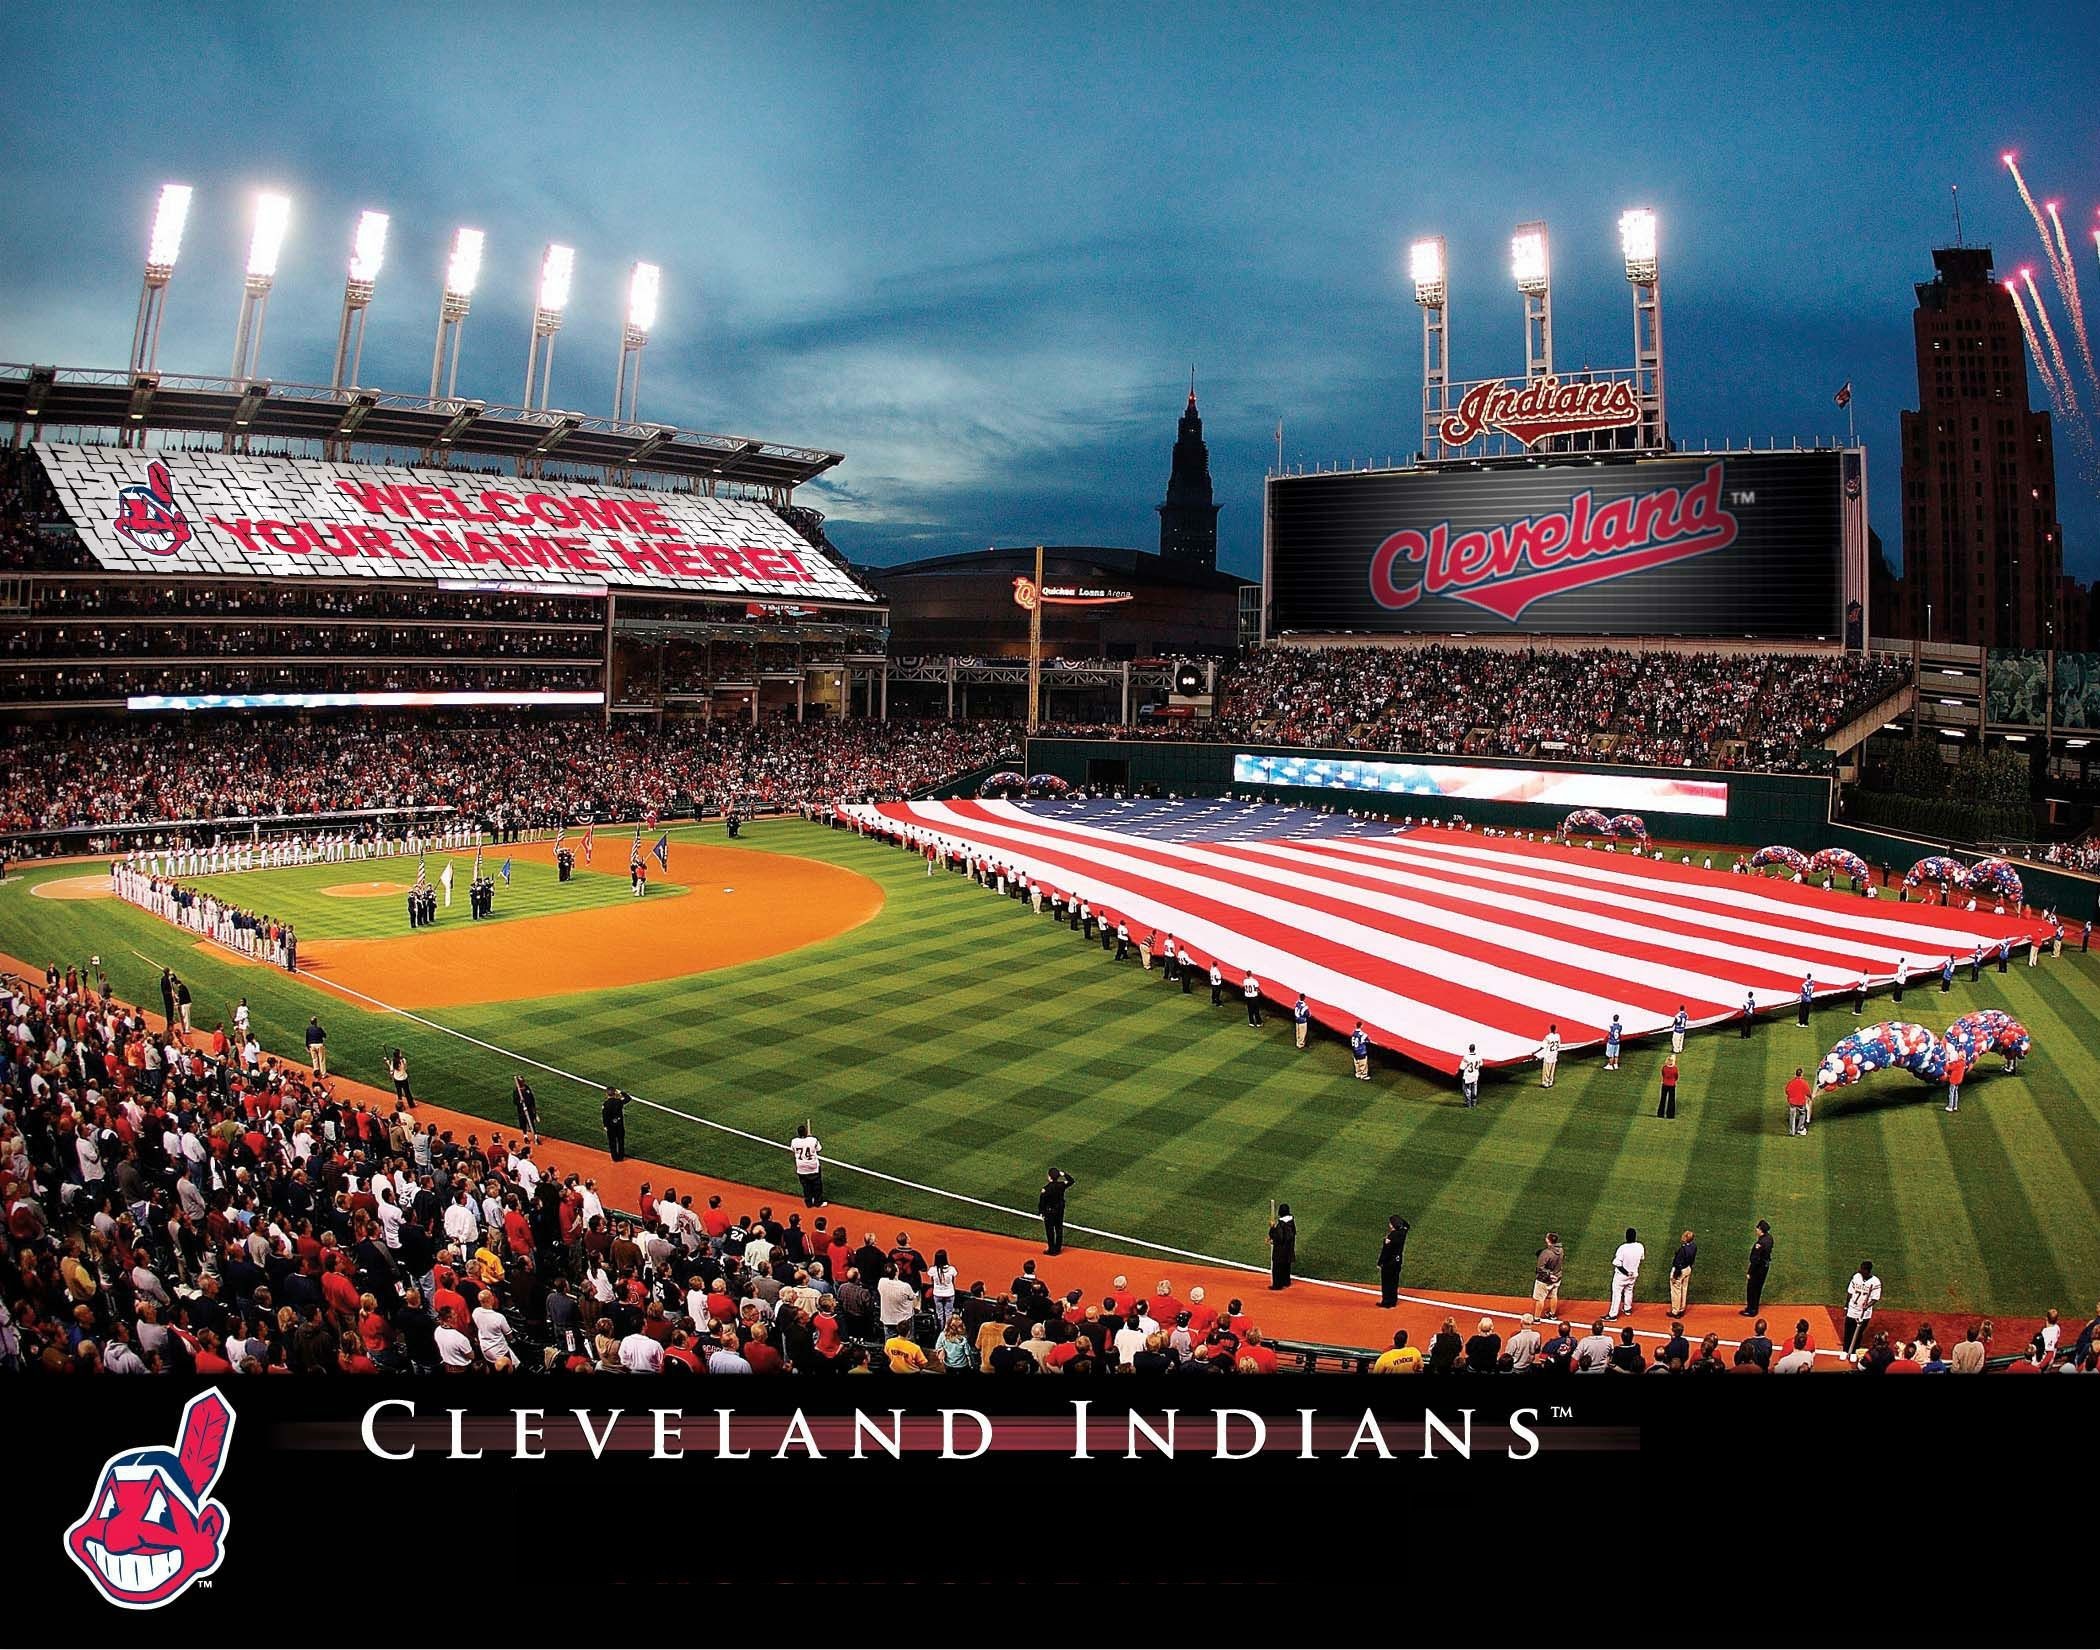 Cleveland Indians Wallpapers Images Photos Pictures - Soccer-specific Stadium - HD Wallpaper 